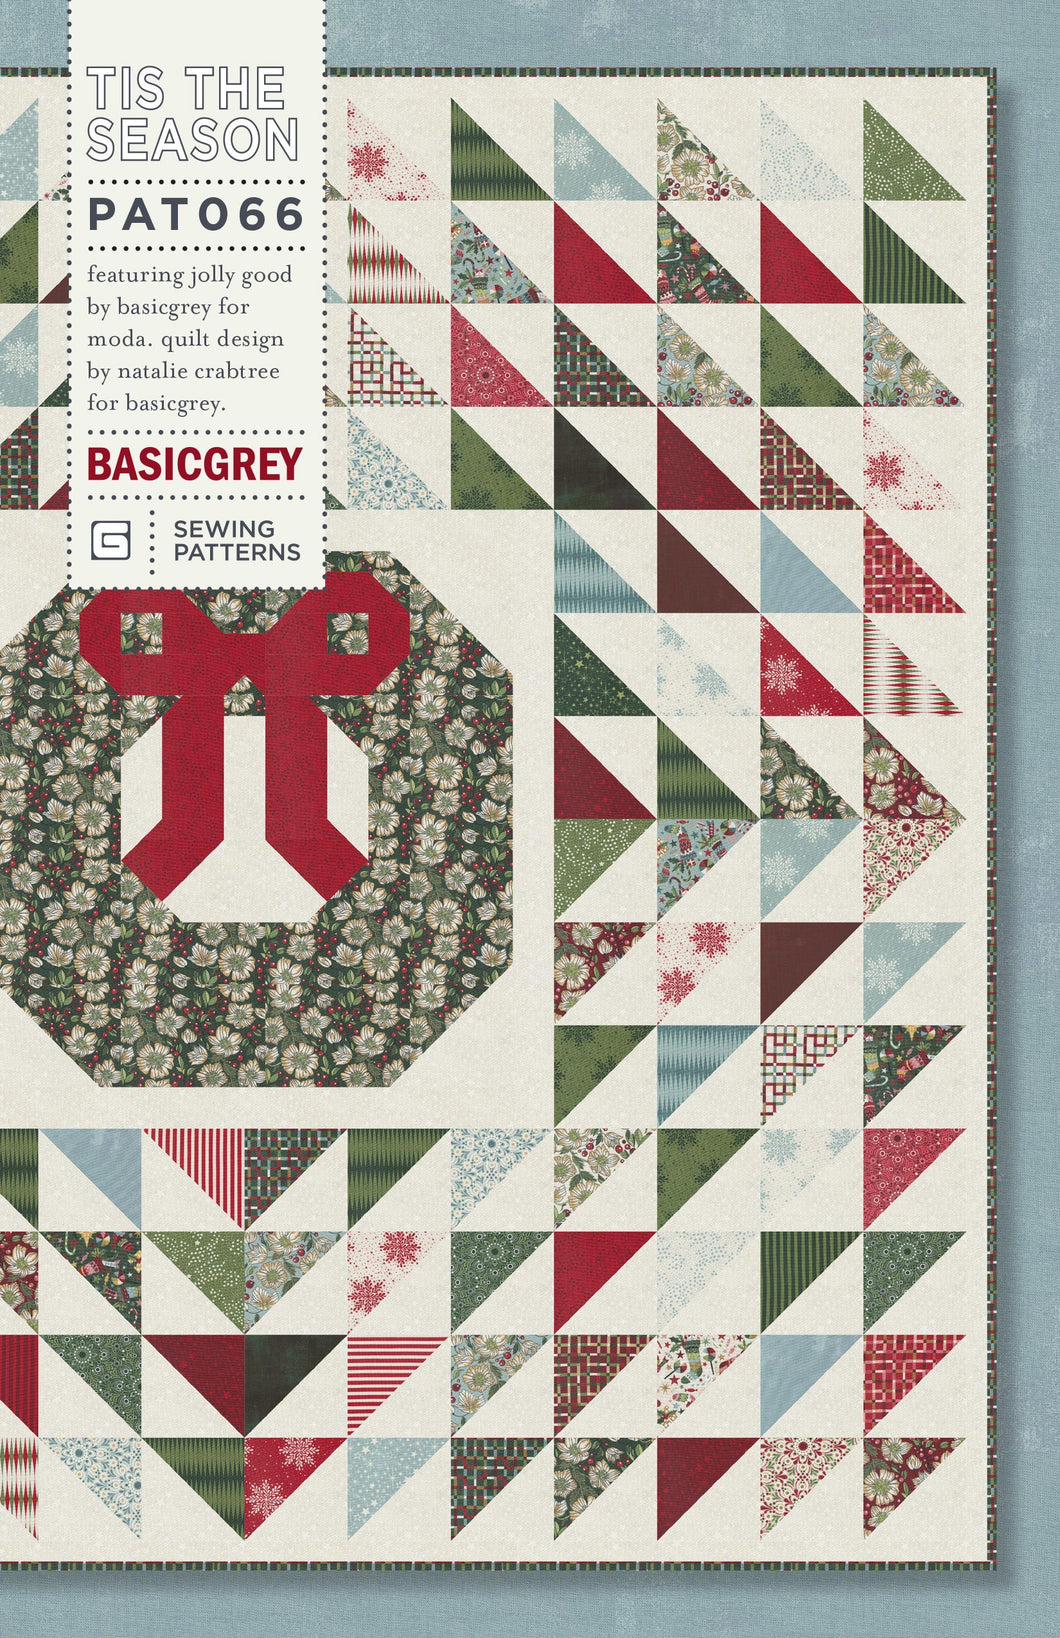 Tis the Season Christmas wreath quilt by Natalie Crabtree for BasicGrey. Fabric is Jolly Good by BasicGrey for Moda Fabrics. Fat eighth friendly.